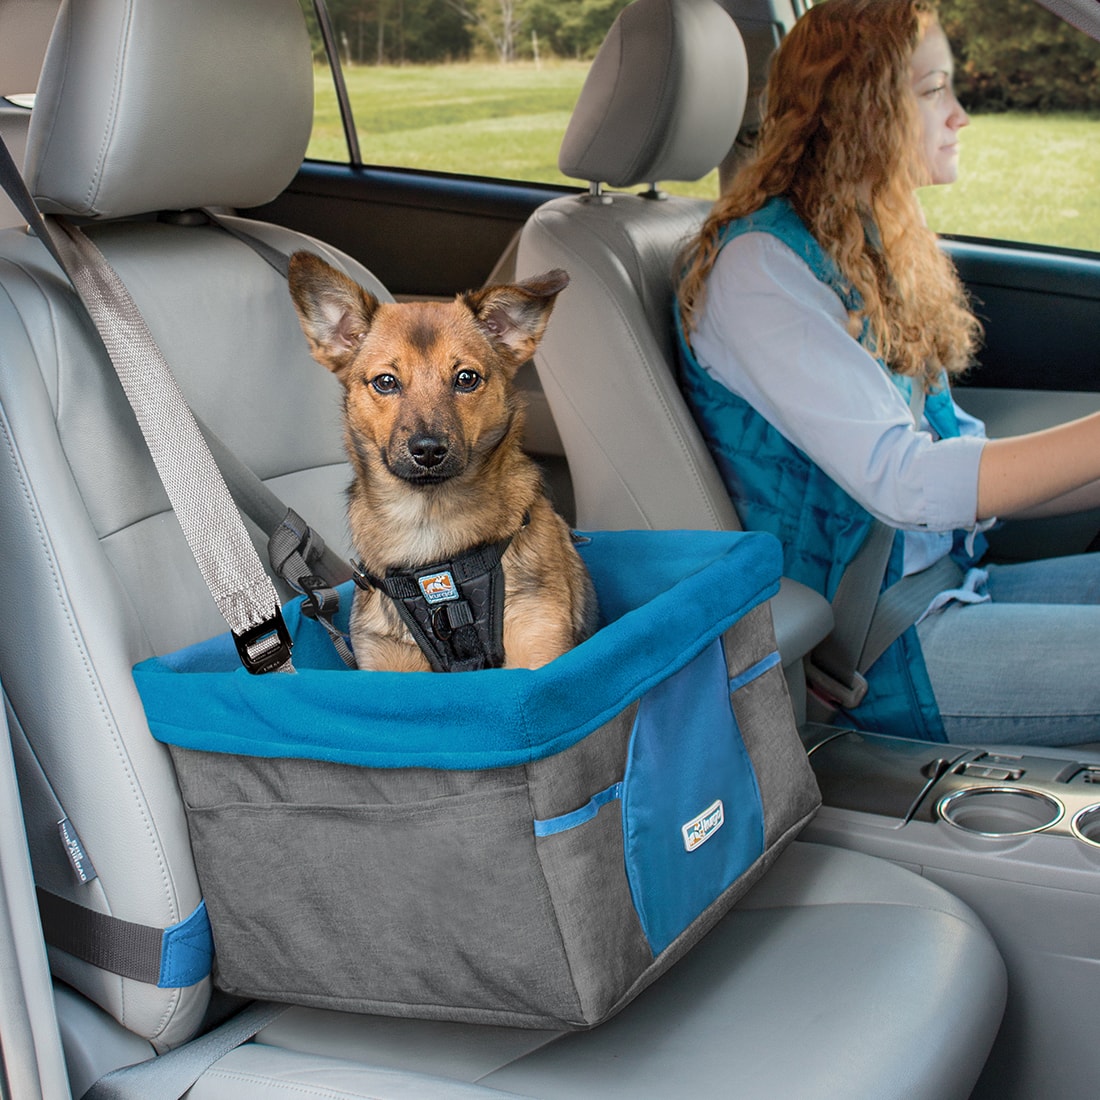 Should a Dog Be in a Car Seat? Ensuring Pet Safety